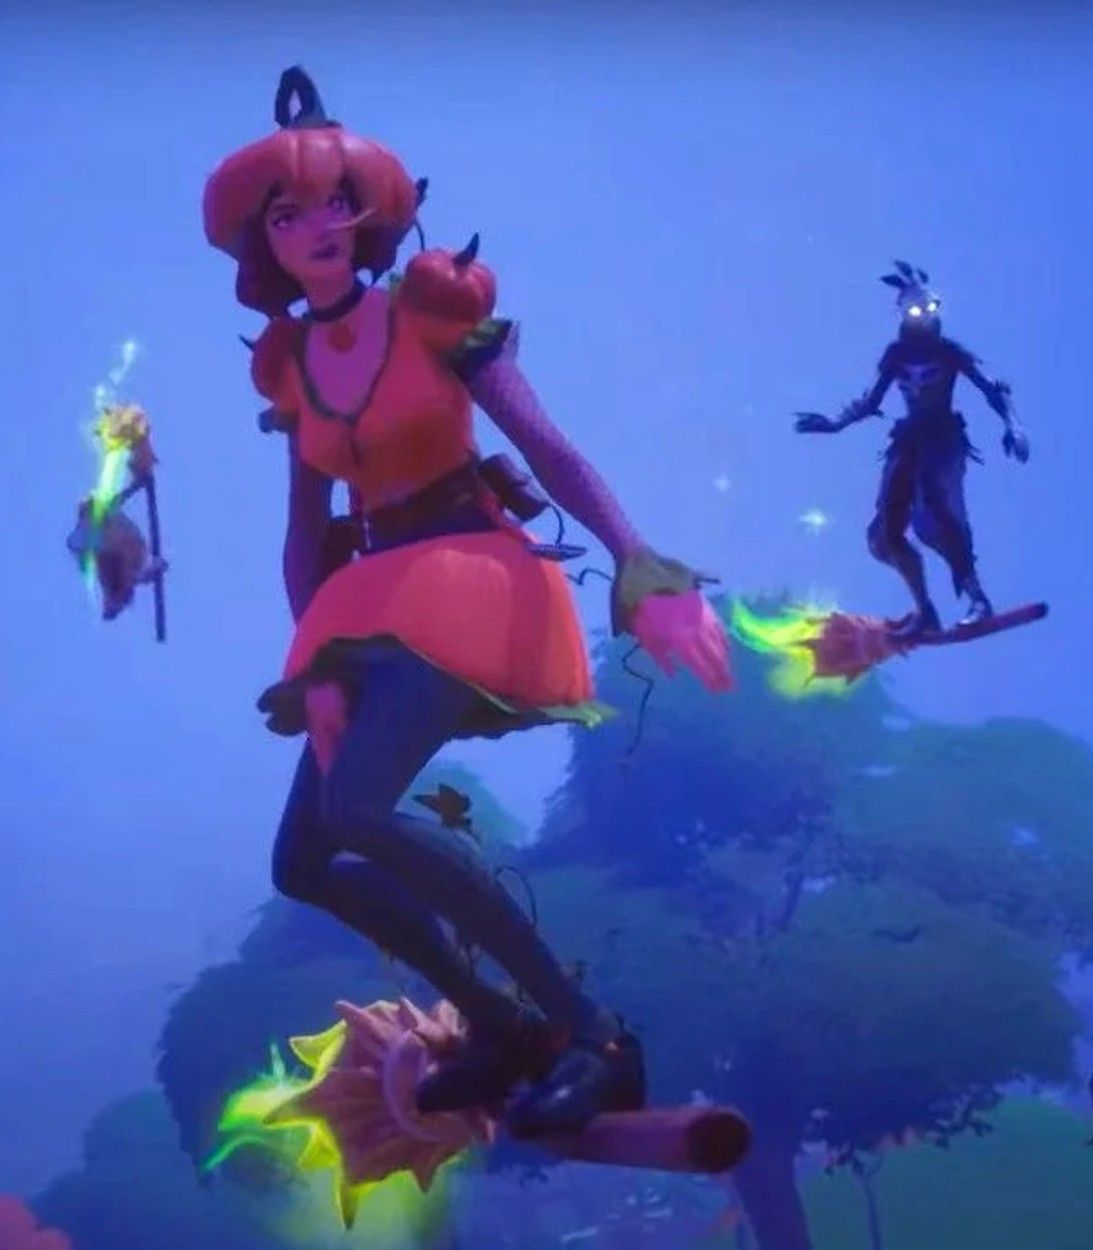 Players ride Witch Brooms during the Fortnitemares event in Fortnite